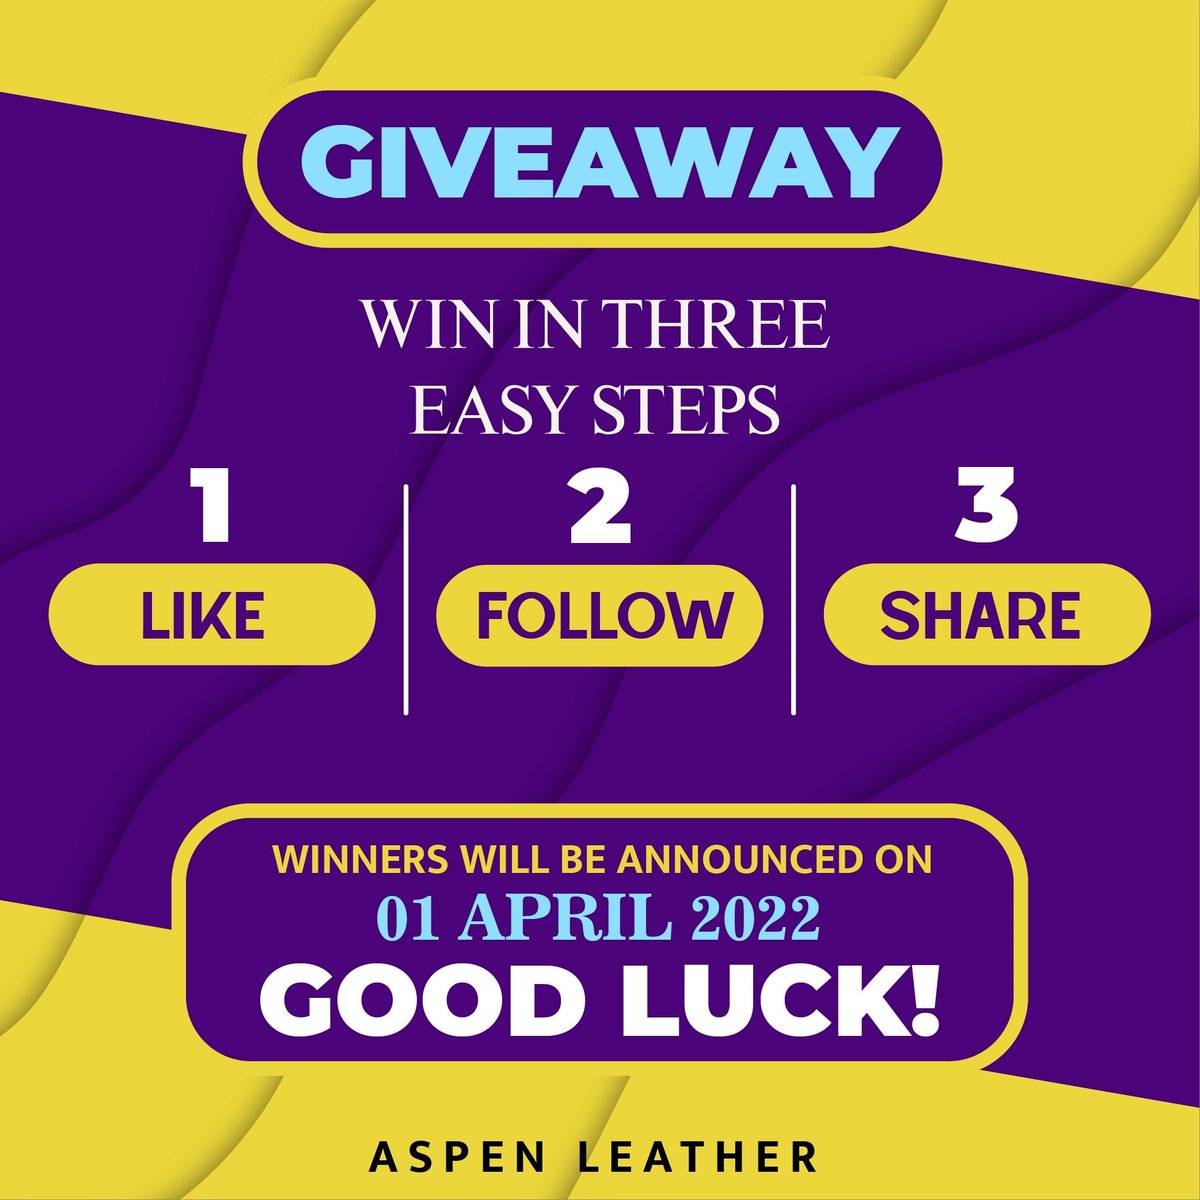 It’s time for GIVEAWAY
To participate, all you need to do is
1.Repost the post on the story & tag @aspenleather.in
(send screenshot if private account)
2.Follow @aspenleather.in
3.Tag 3 friends and make sure they are following us too.Go for it.
#giveaway #aspenleathergiveaway